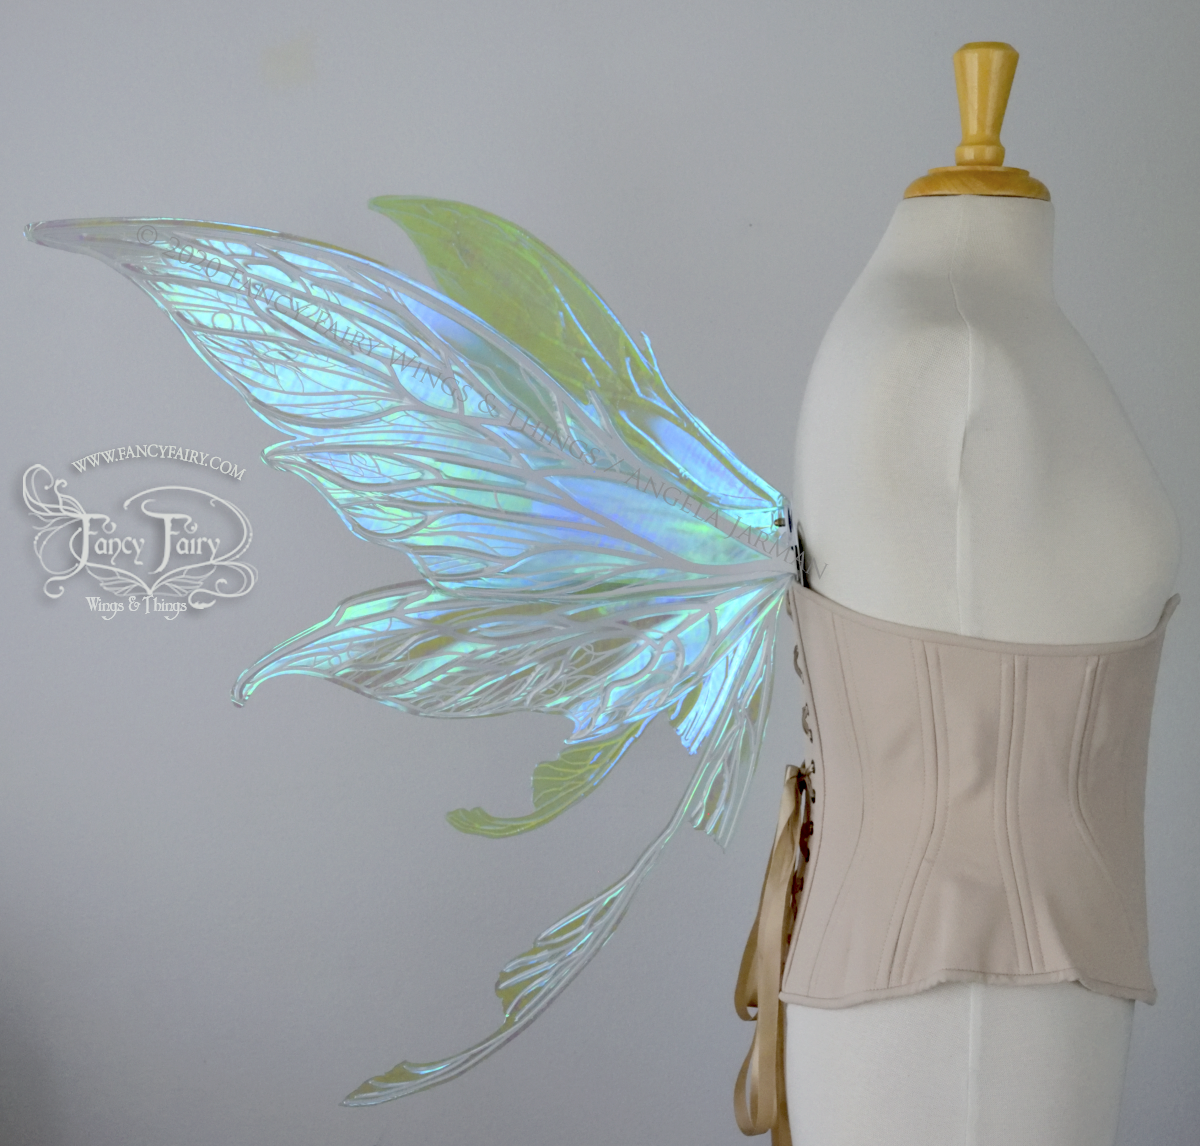 Colette Convertible Iridescent "Pix" Fairy Wings in Absinthe with white veins